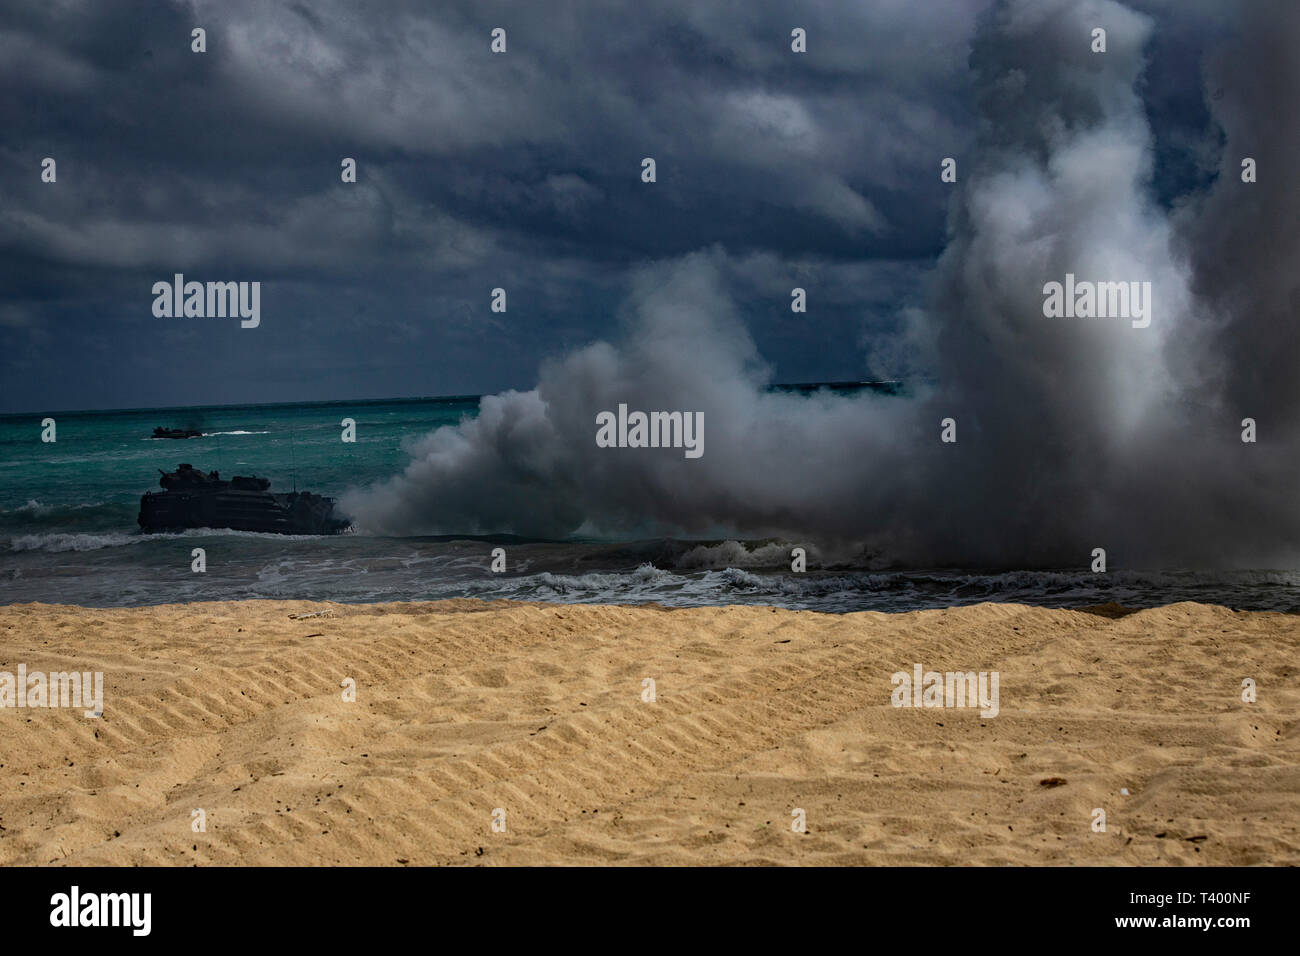 A U.S. Marine Corps amphibious assault vehicle assigned to Combat Assault Company, 3d Marine Regiment, creates a smokescreen to conceal a simulated amphibious beach assault, Marine Corps Base Hawaii, Apr. 9, 2019. The unit conducted a simulated beach assault to improve their lethality and cooperation, as mechanized unit and force in readiness. (U.S. Marine Corps photo by Sgt. Alex Kouns) Stock Photo